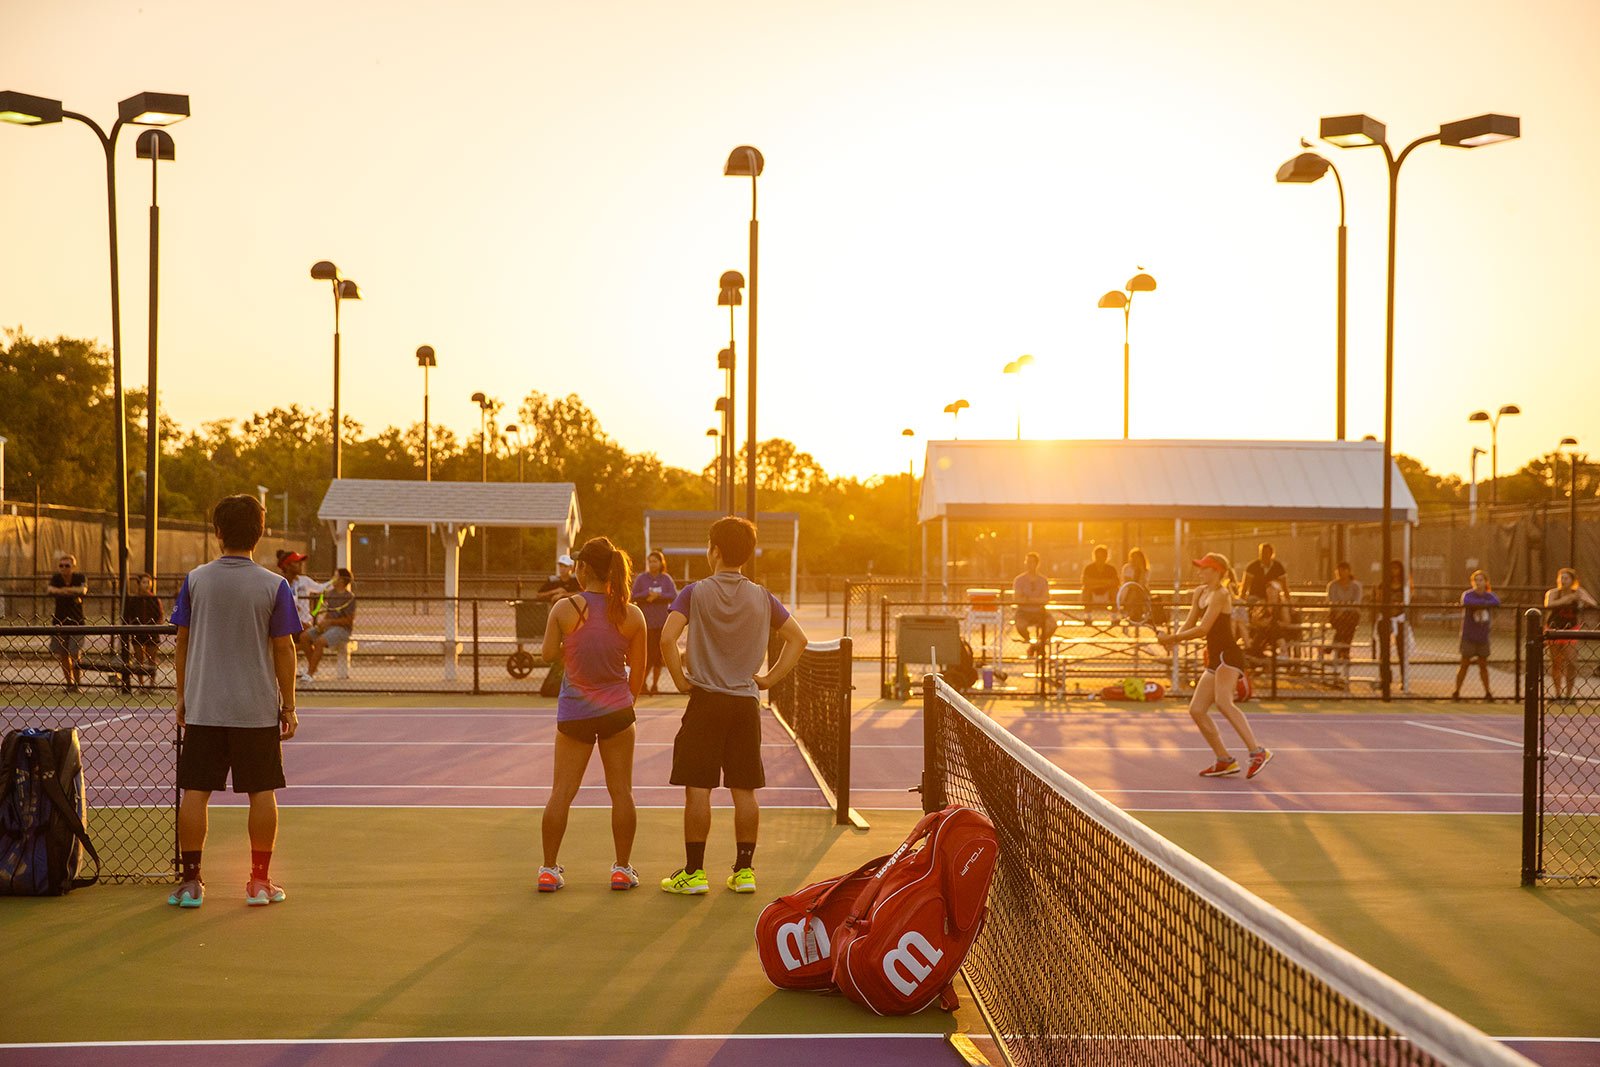 IMG Academy Tennis Courts